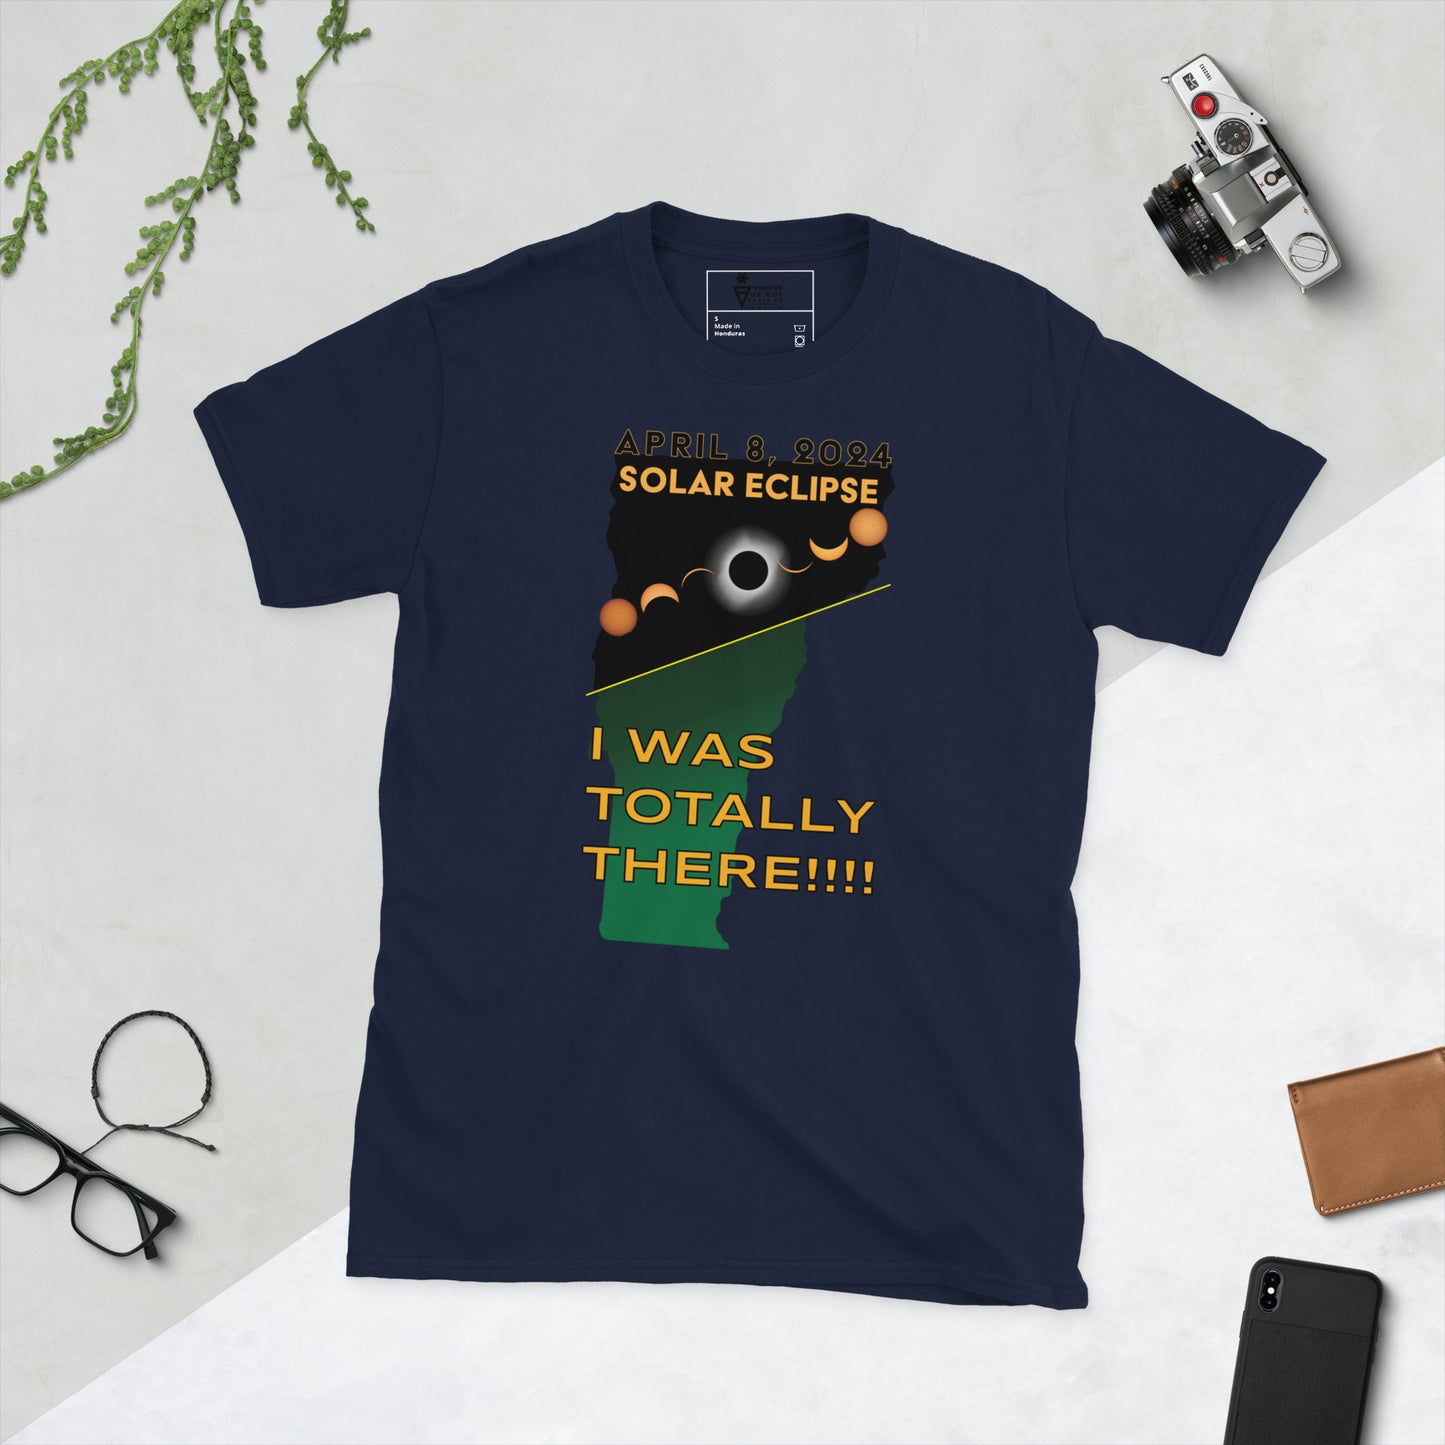 Totally There! VT Eclipse Short-Sleeve Unisex T-Shirt